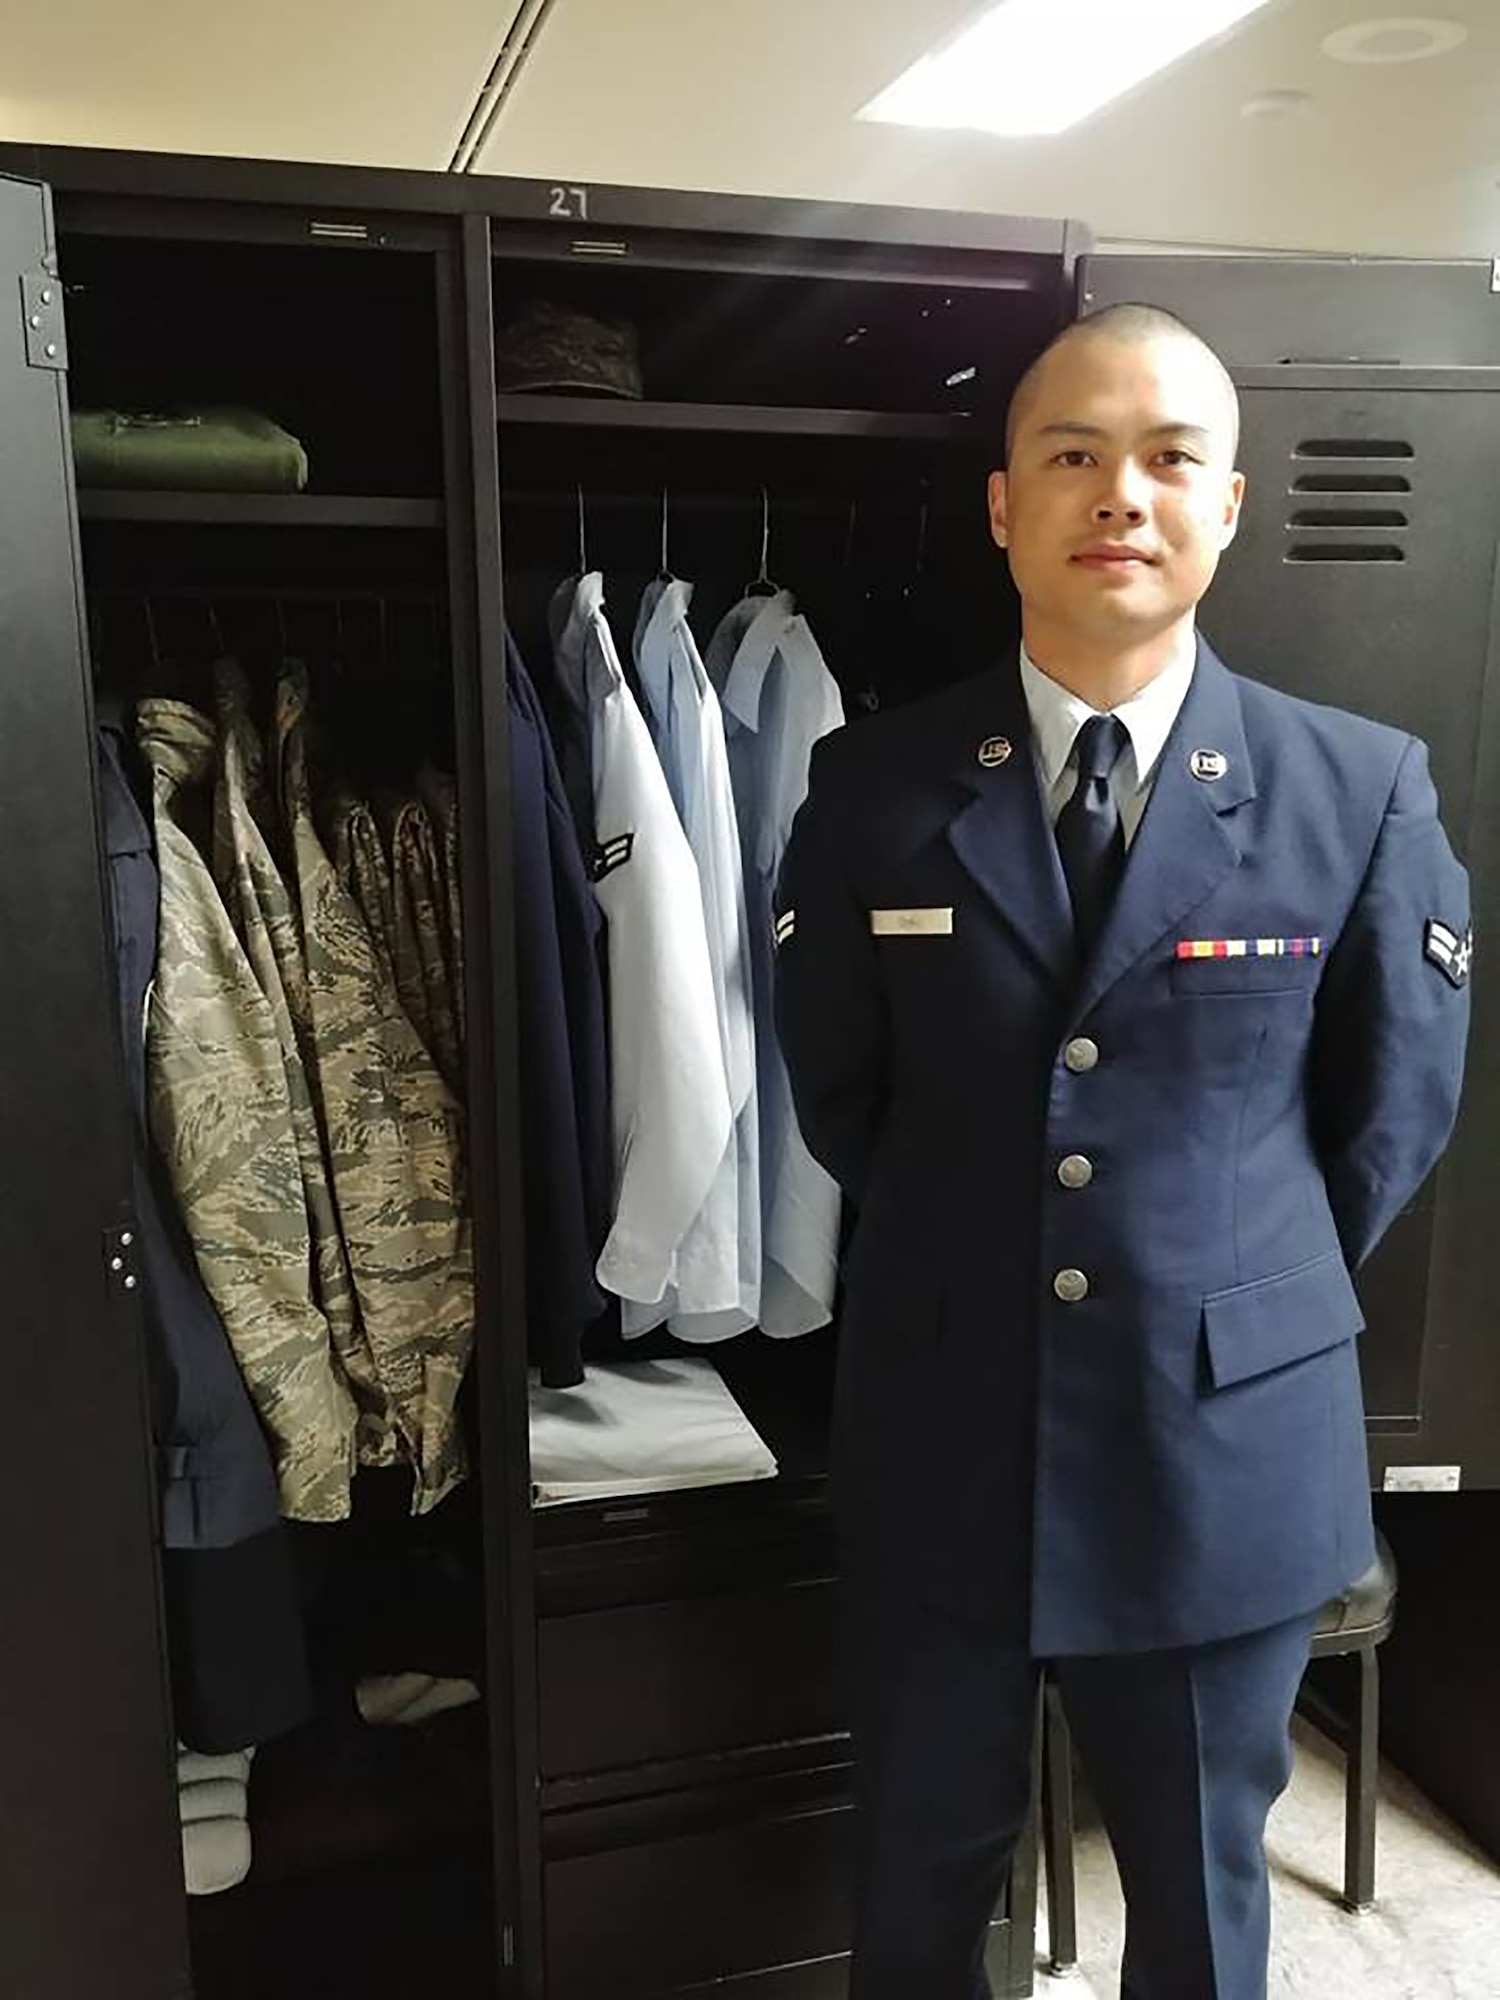 Senior Airman Joe Chau, 718th Intelligence Squadron cyber systems operations technician, was voted Most Outstanding Airman by his flight peers during basic military training.